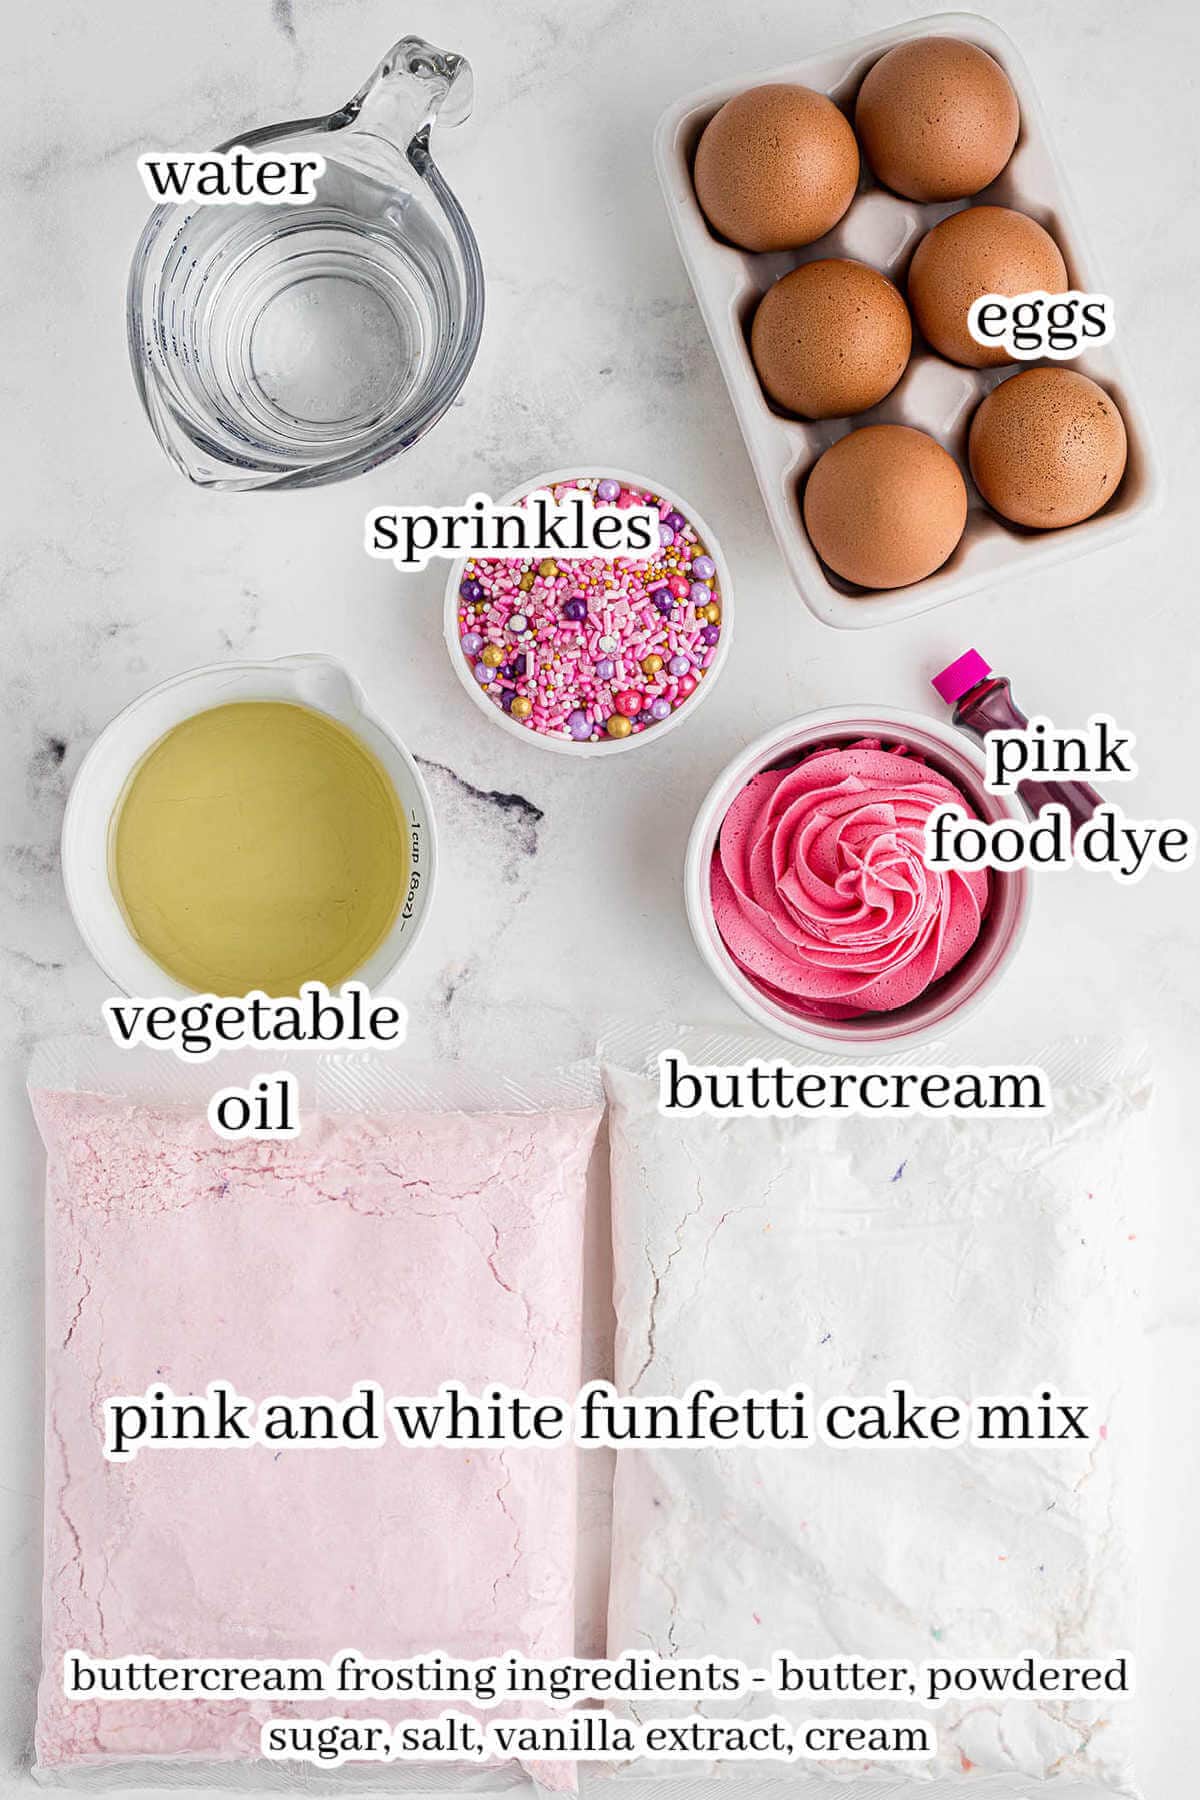 Ingredients for the funfetti layer cake, with print overlay.